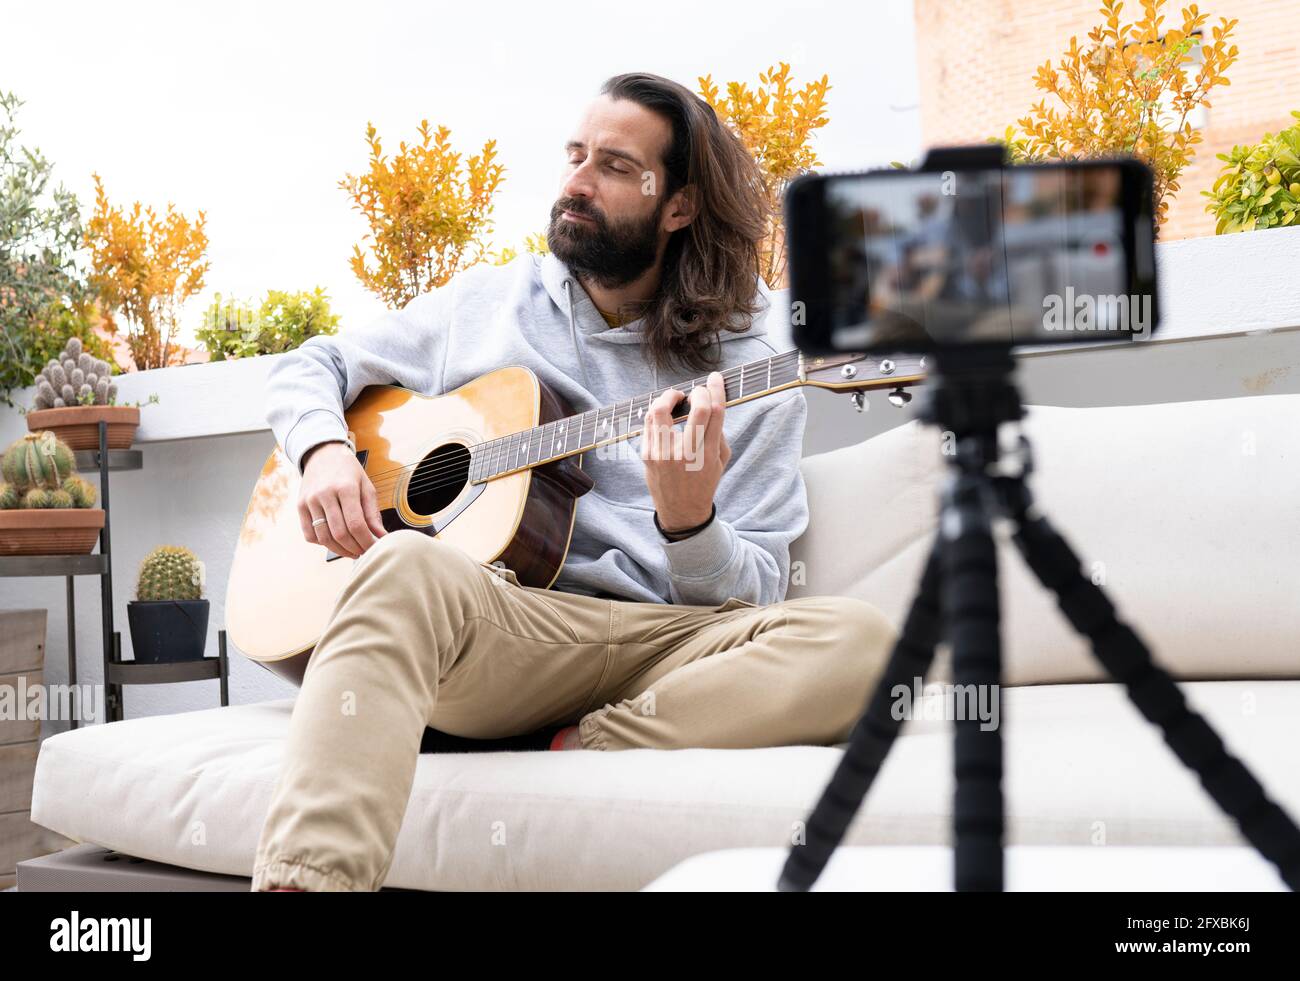 Male influencer vlogging while playing guitar on balcony Stock Photo - Alamy